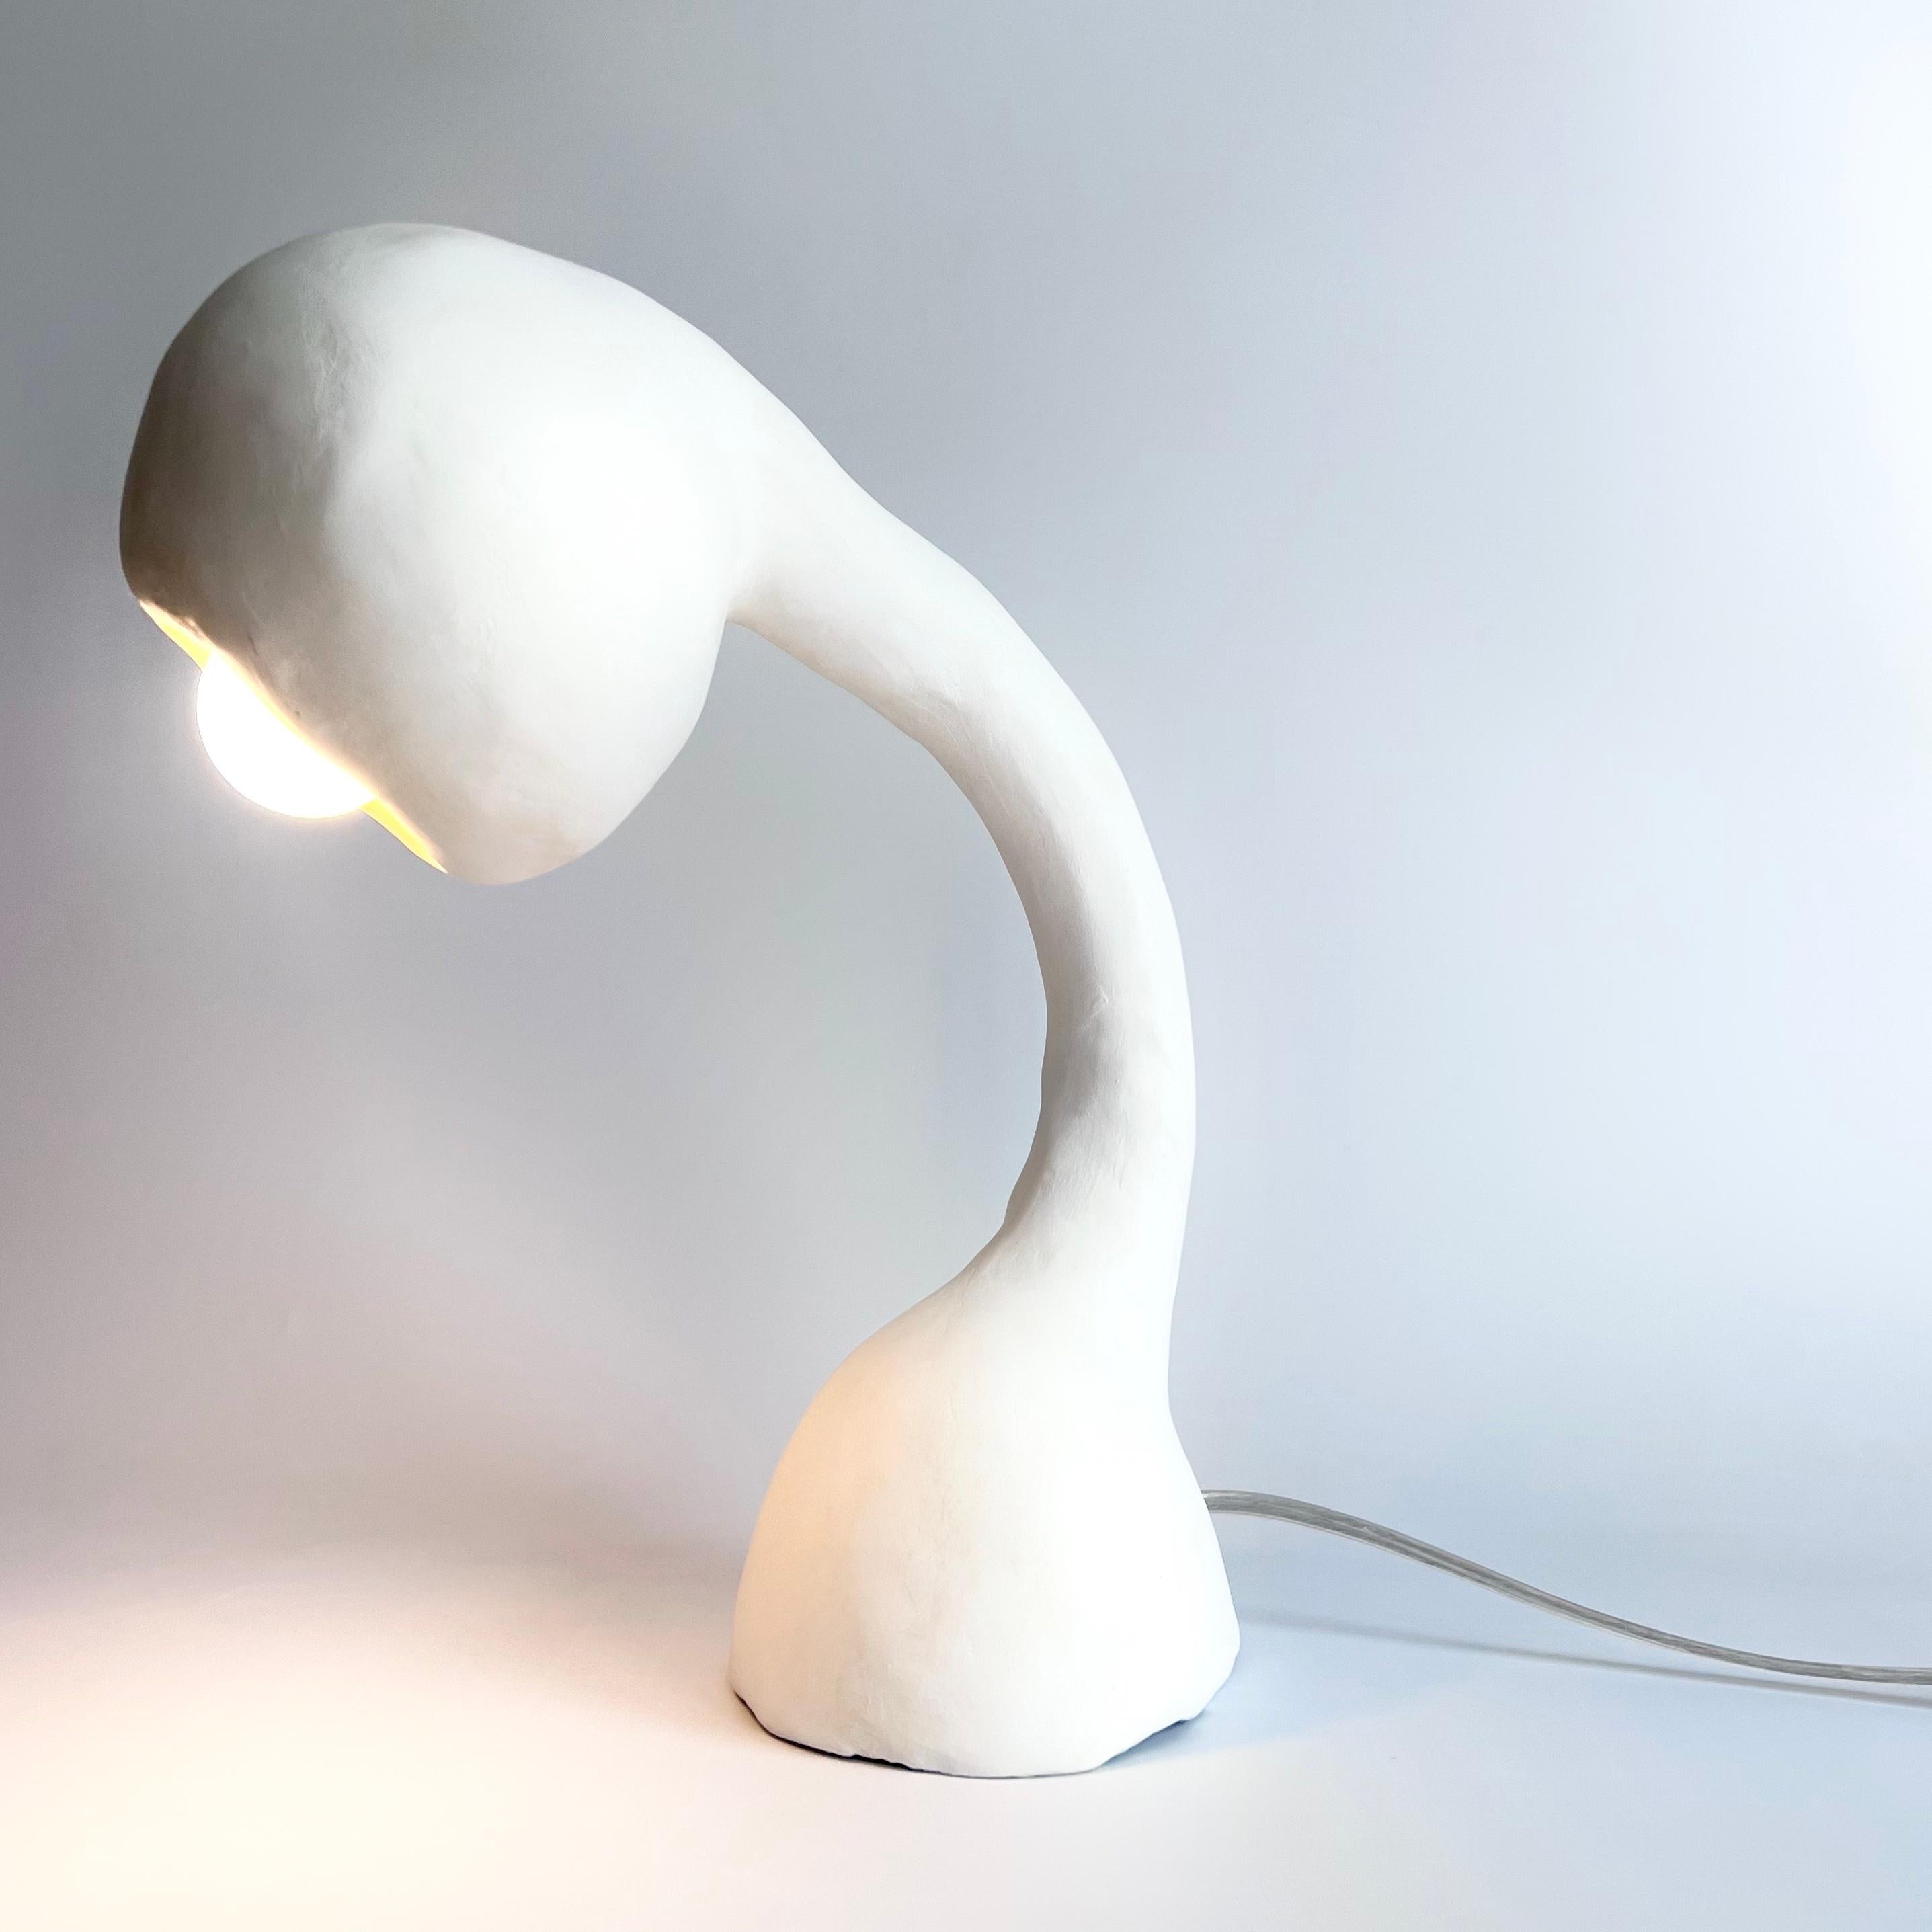 Designed by Studio Chora, 2022.
Biomorphic: ‘bios' meaning life and 'morphe' meaning form. 

Dimensions: 
height: 13-1/2” 
width: 12-0”
depth: 6-1/2”

The Biomorphic series of organic light sculptures are one-of-a-kind and hand moulded from a